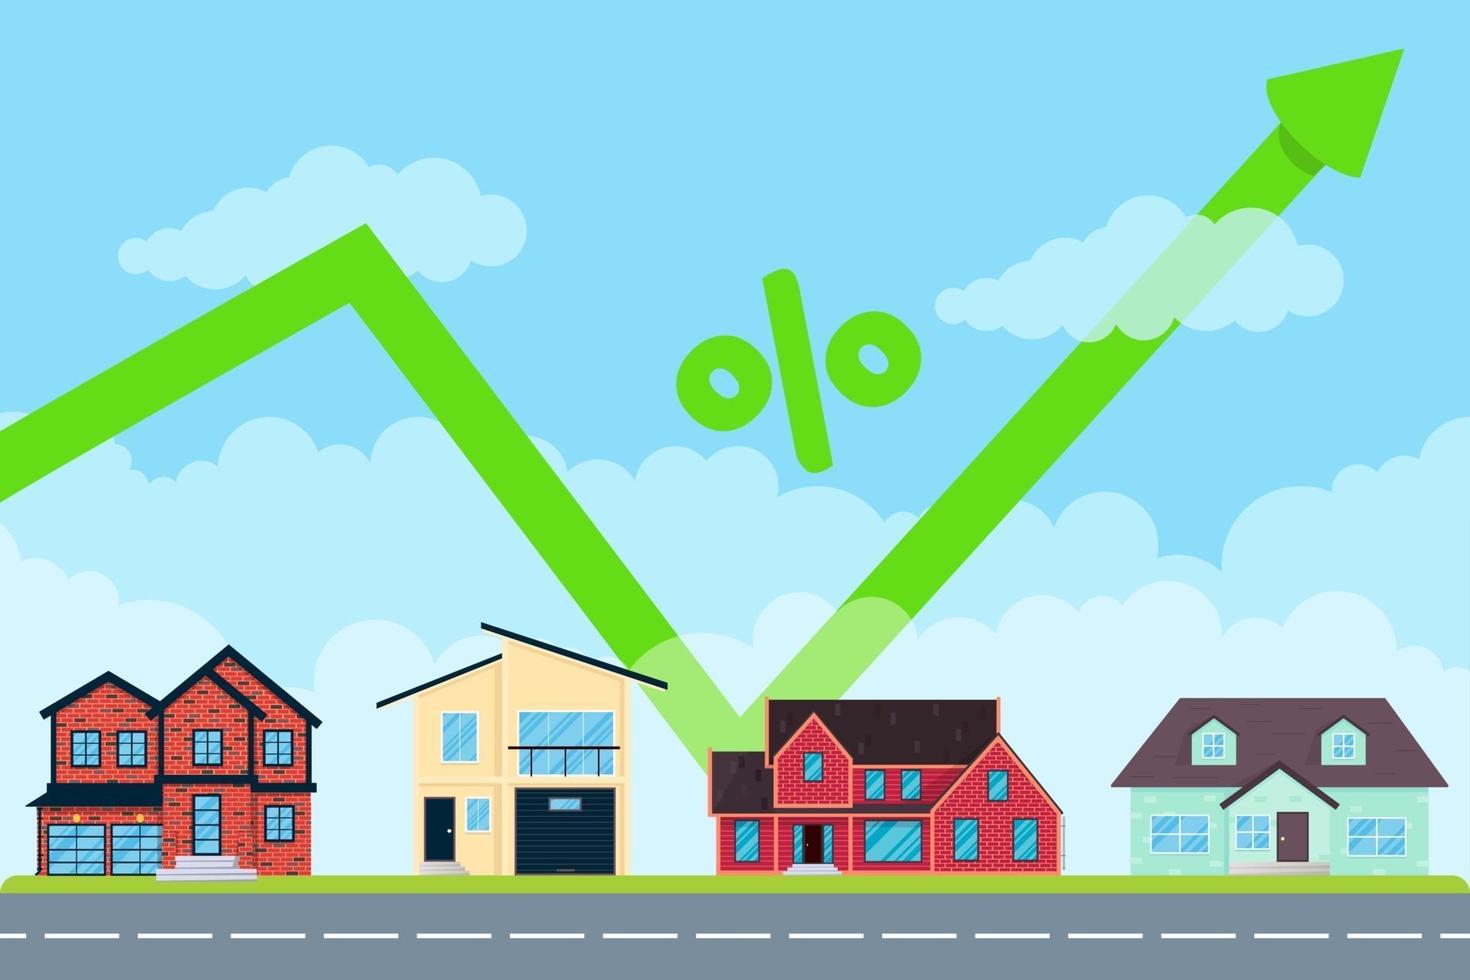 House price like arrow growth in the air for many. Good investment concept or big money price for buying new home. Various buildings set and arrow jumps up banner flat style vector illustration.